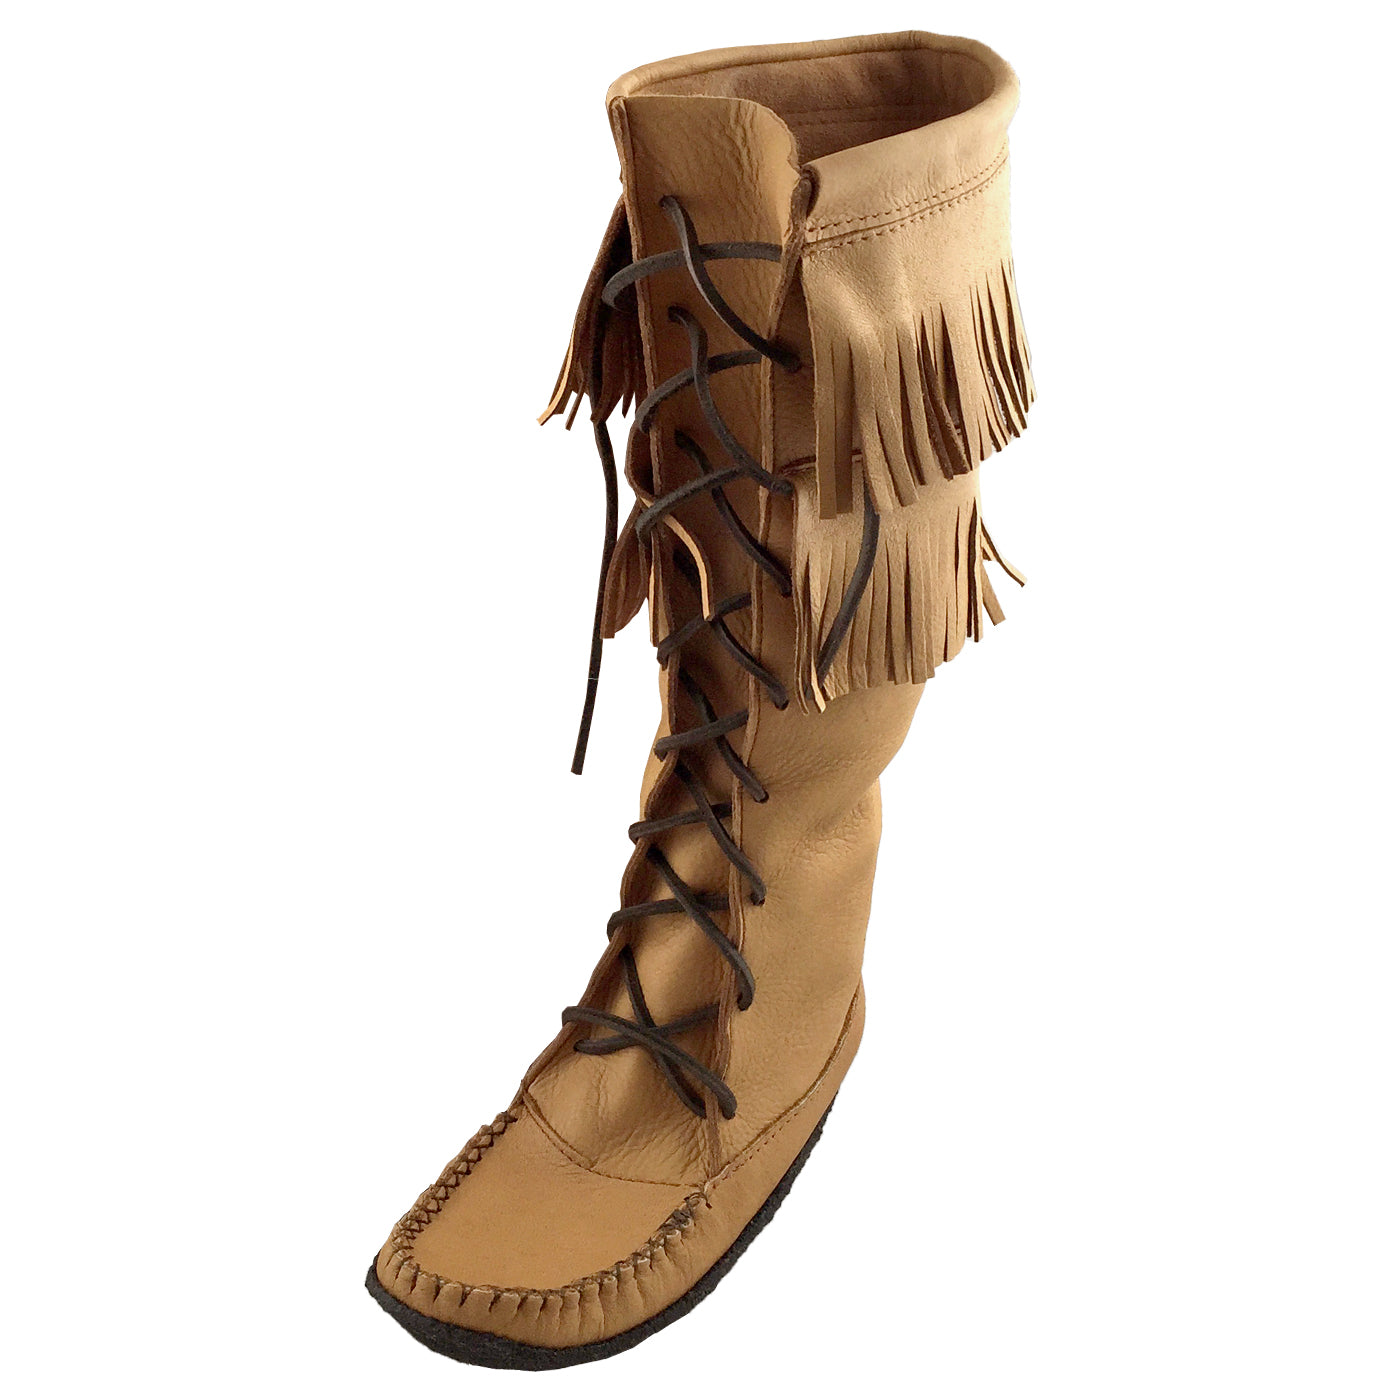 Mukluk Boots – Leather-Moccasins